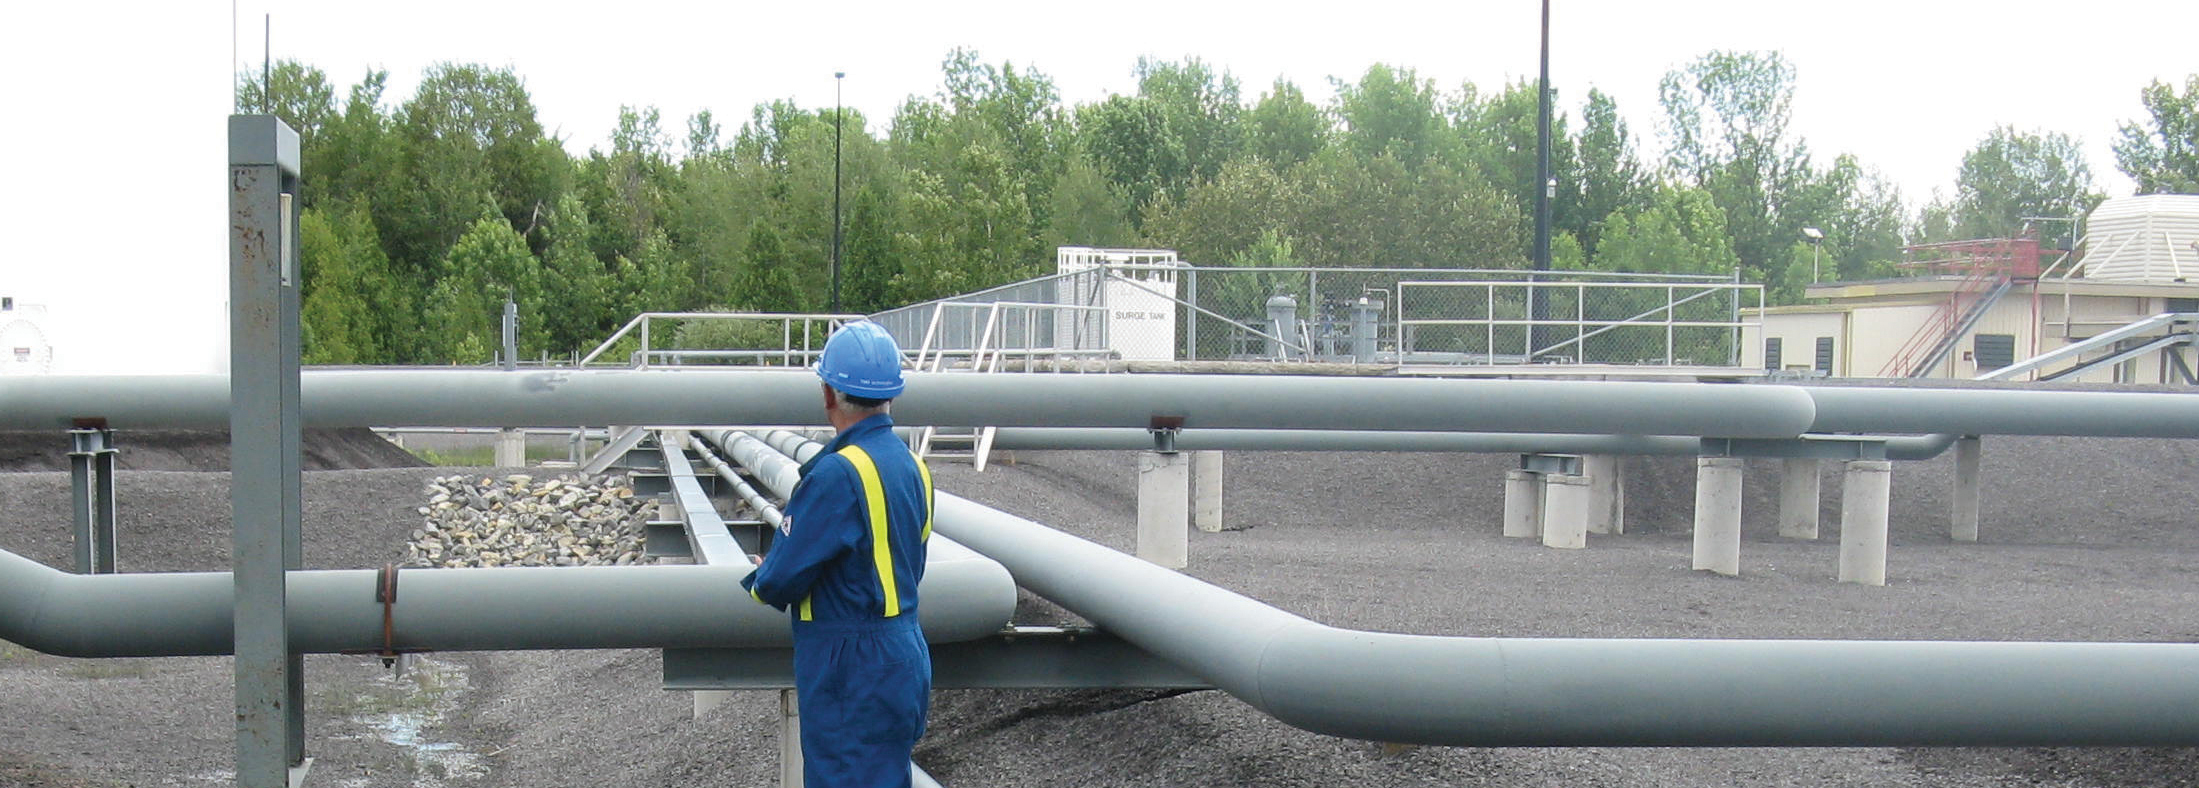 Image of pipelines being inspected by Trans-Northern Pipelines Inc. (TNPI)